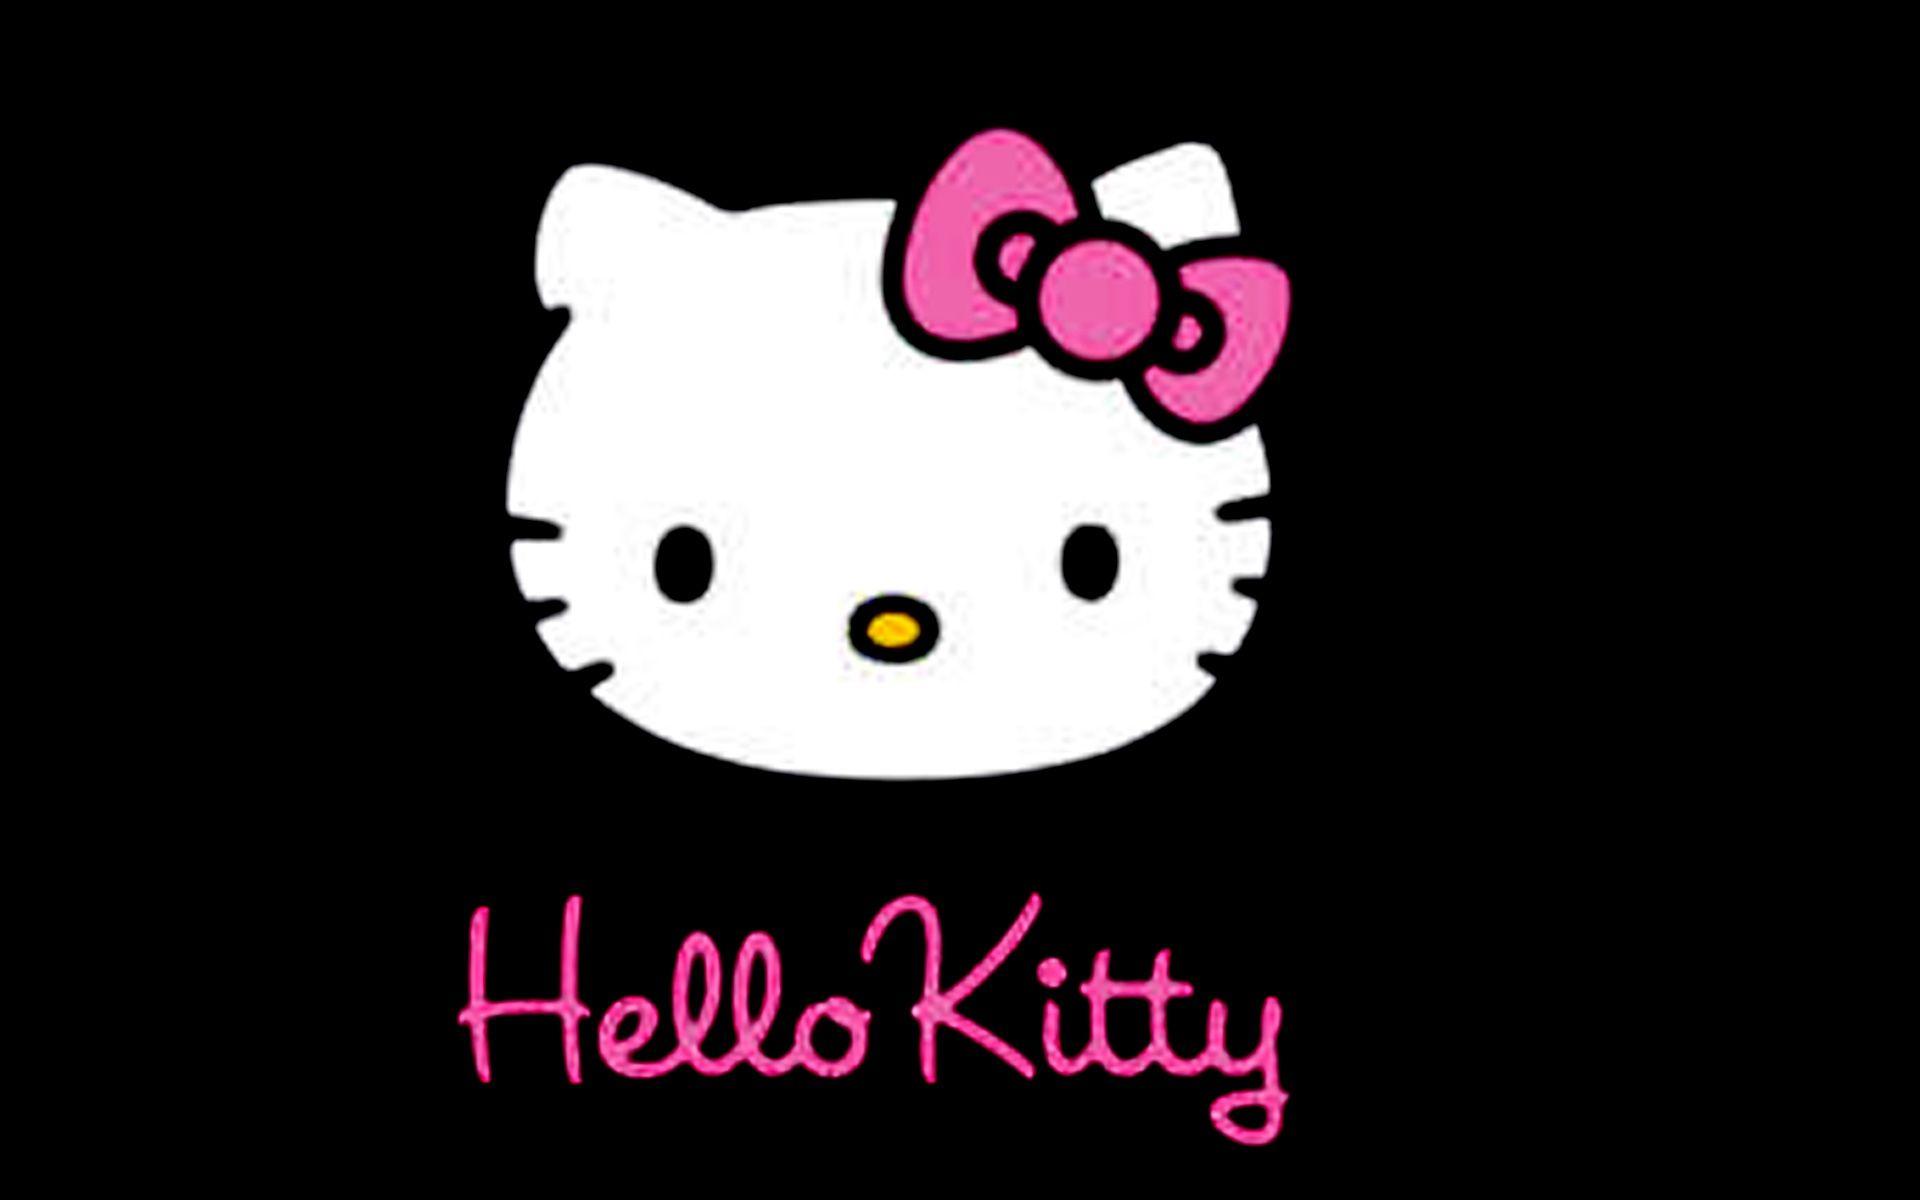 Wallpaper For > Hello Kitty Wallpaper HD Android